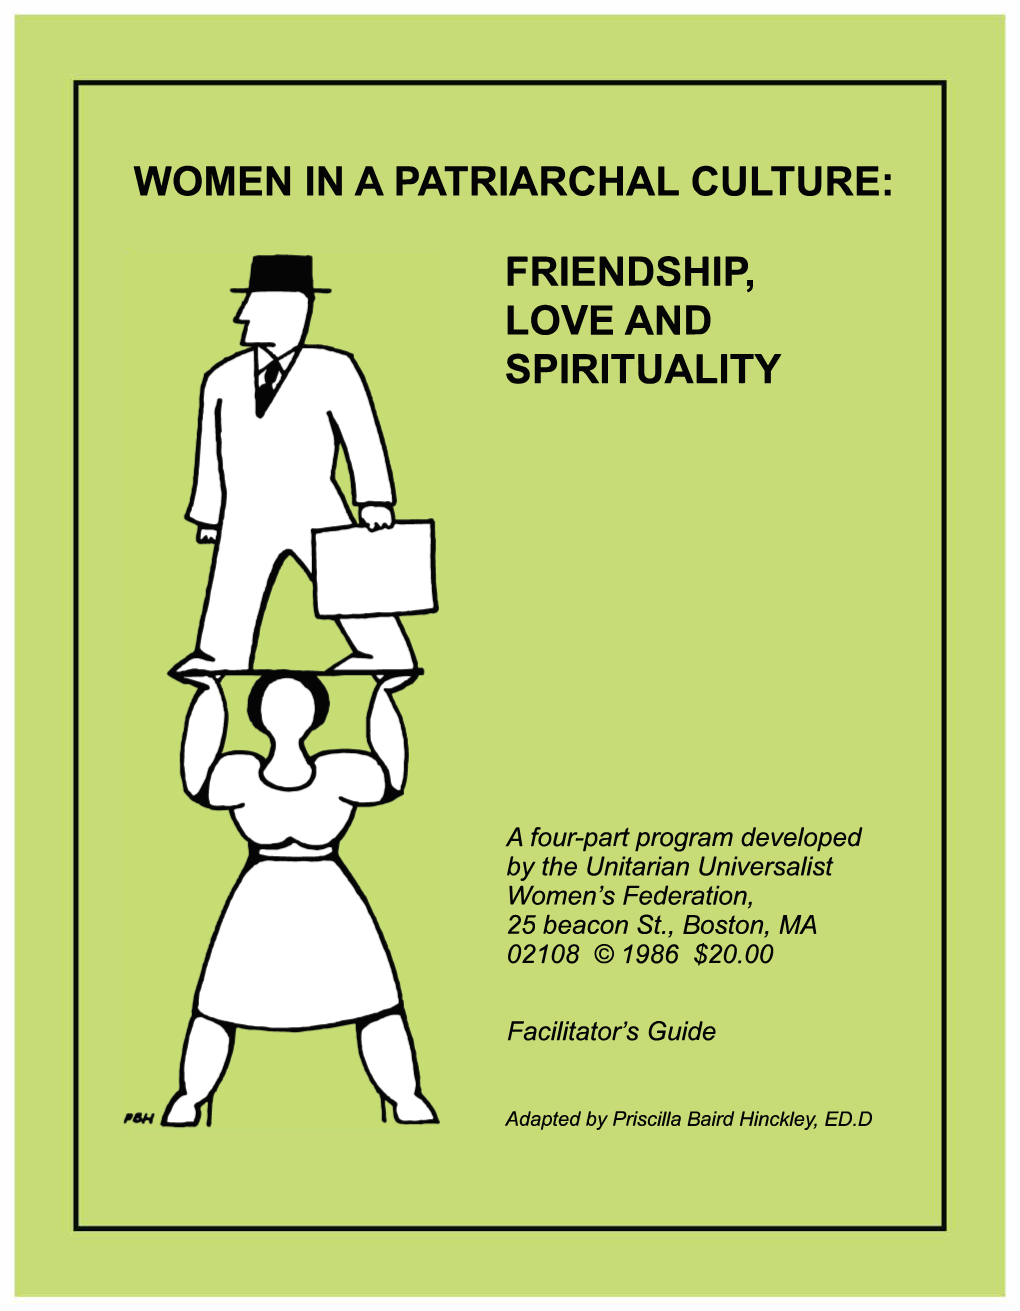 Women in a Patriarchal Culture: Friendship, Love and Spirituality"